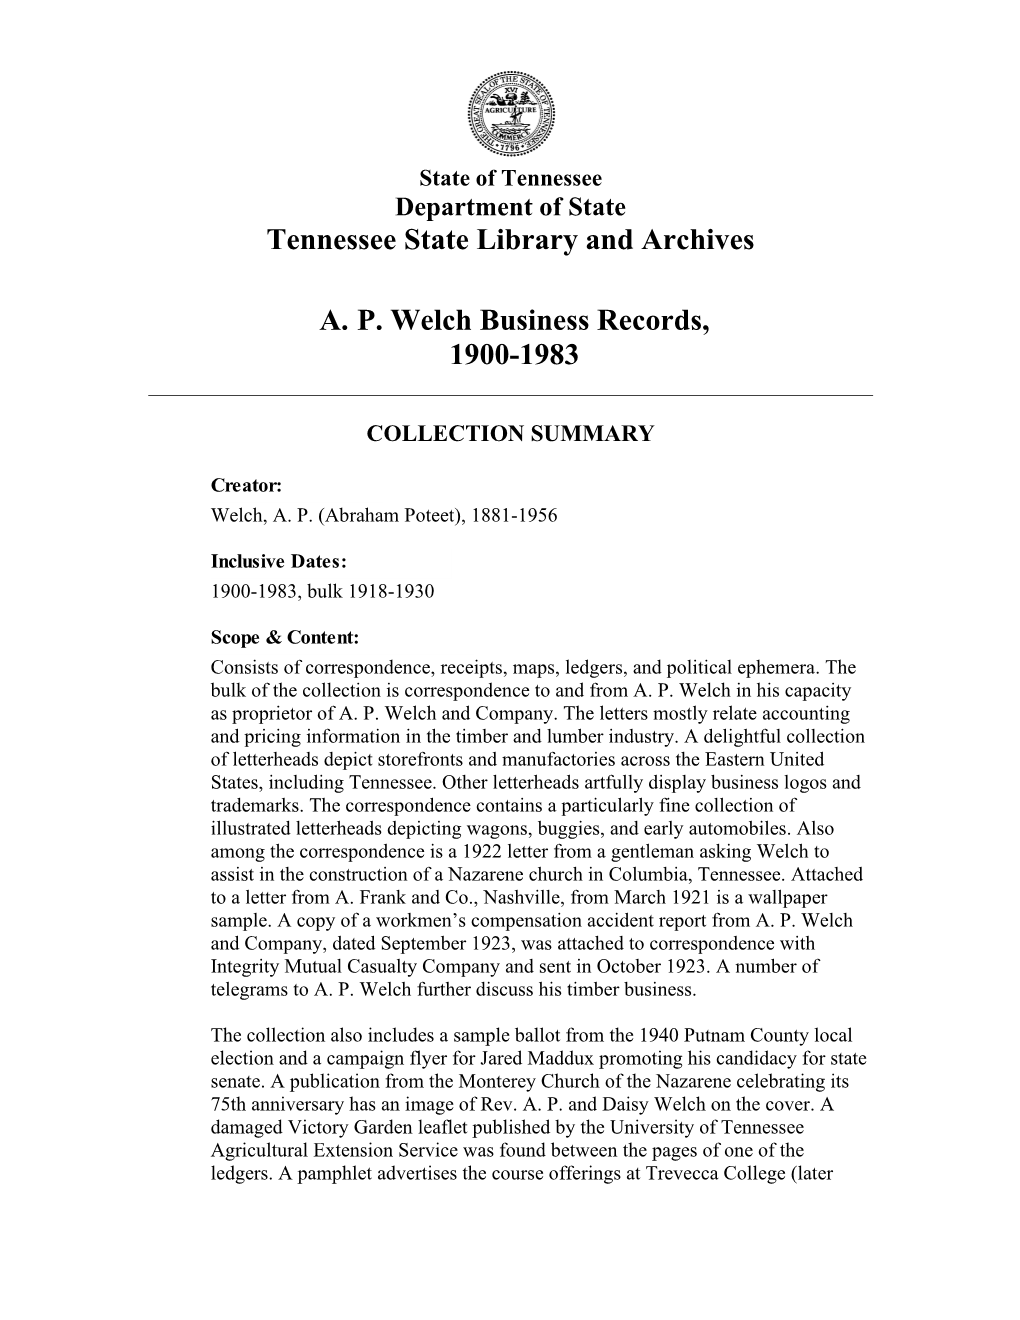 Tennessee State Library and Archives A. P. Welch Business Records